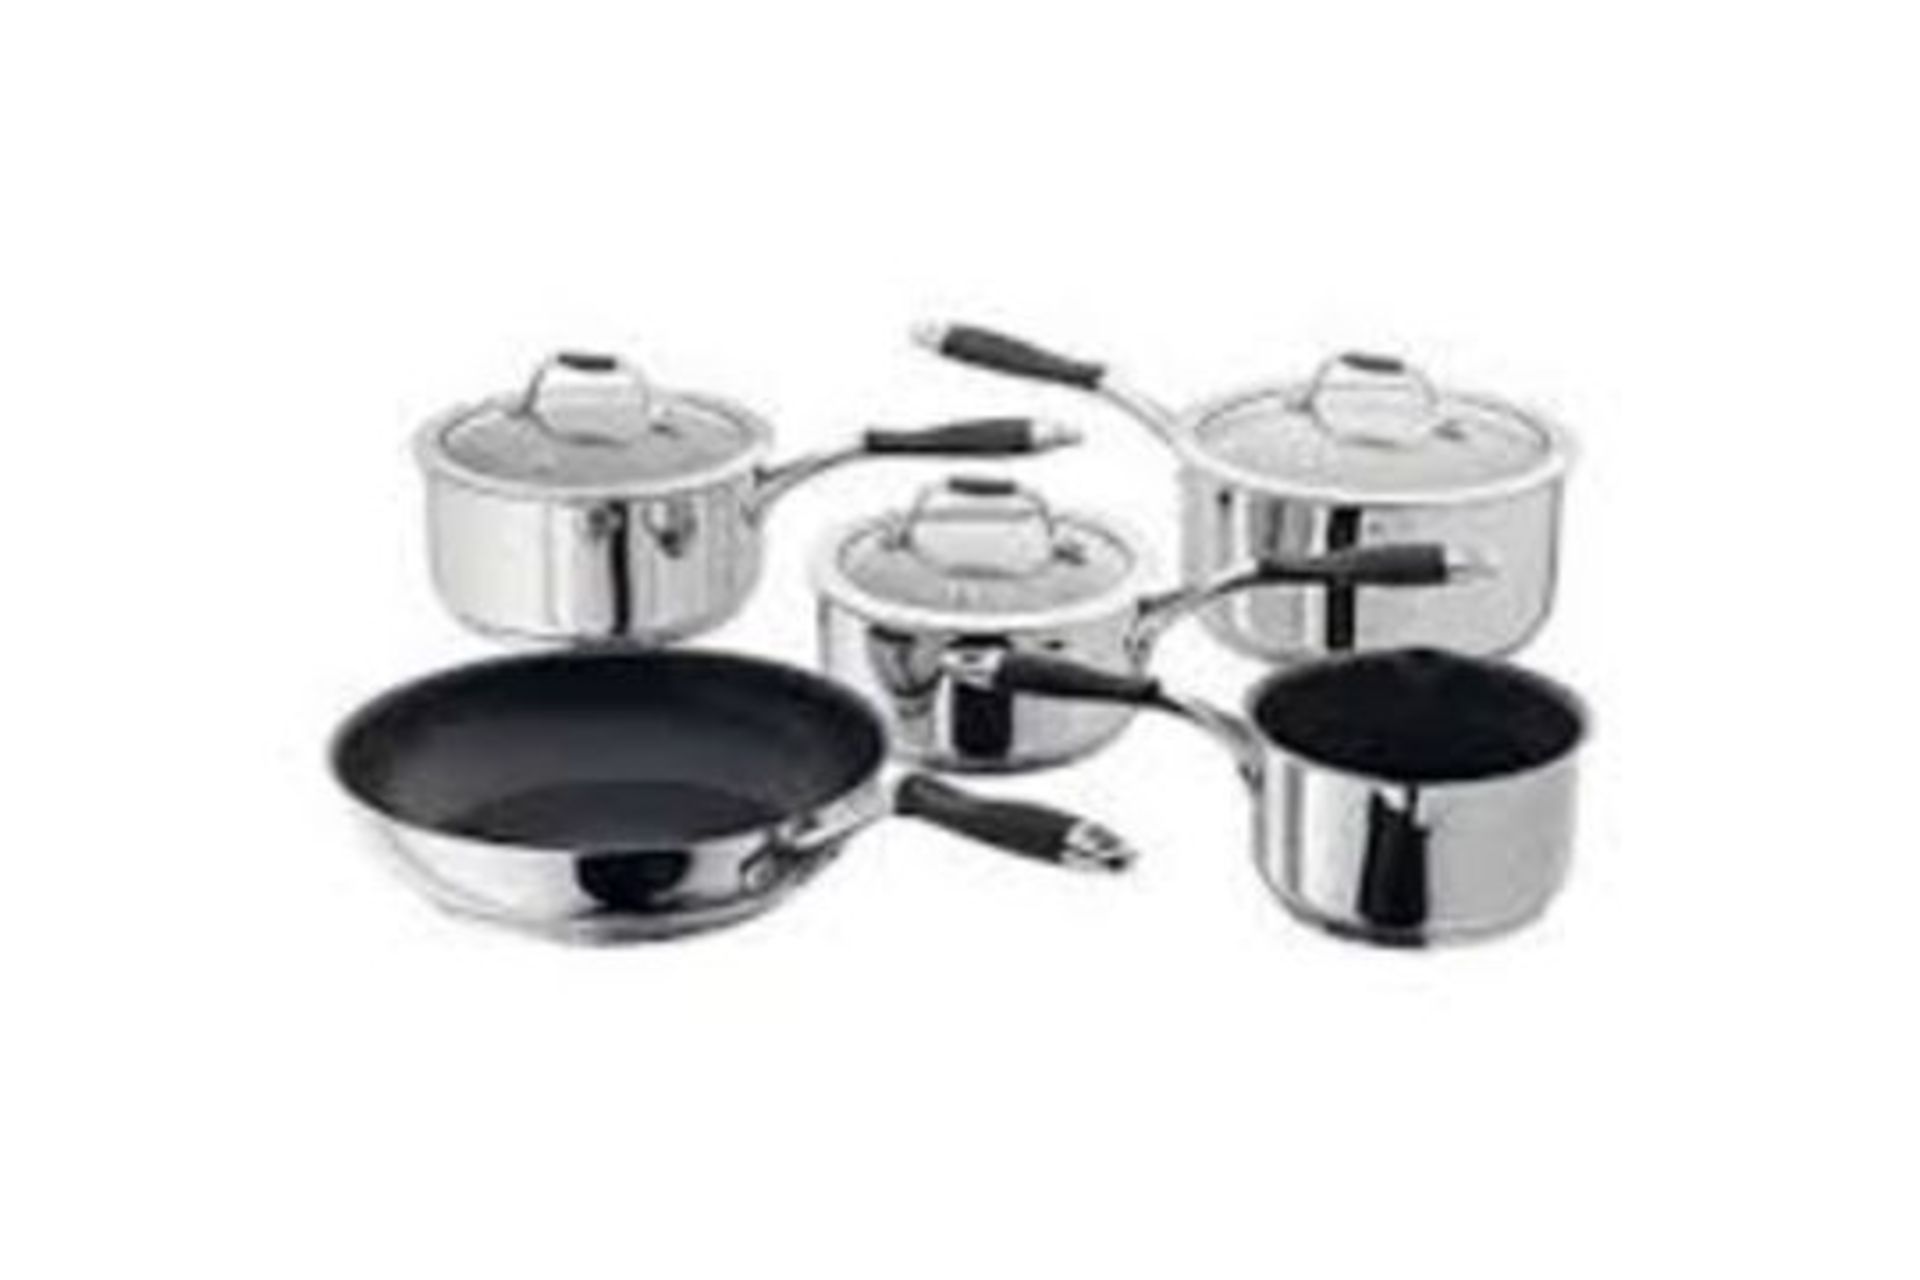 BOXED SET OF URBNCHEF 5 PIECE STAINLESS STEEL PAN SETS. EACH SET INCLUDES: 16CM SAUCE PAN WITH GLASS